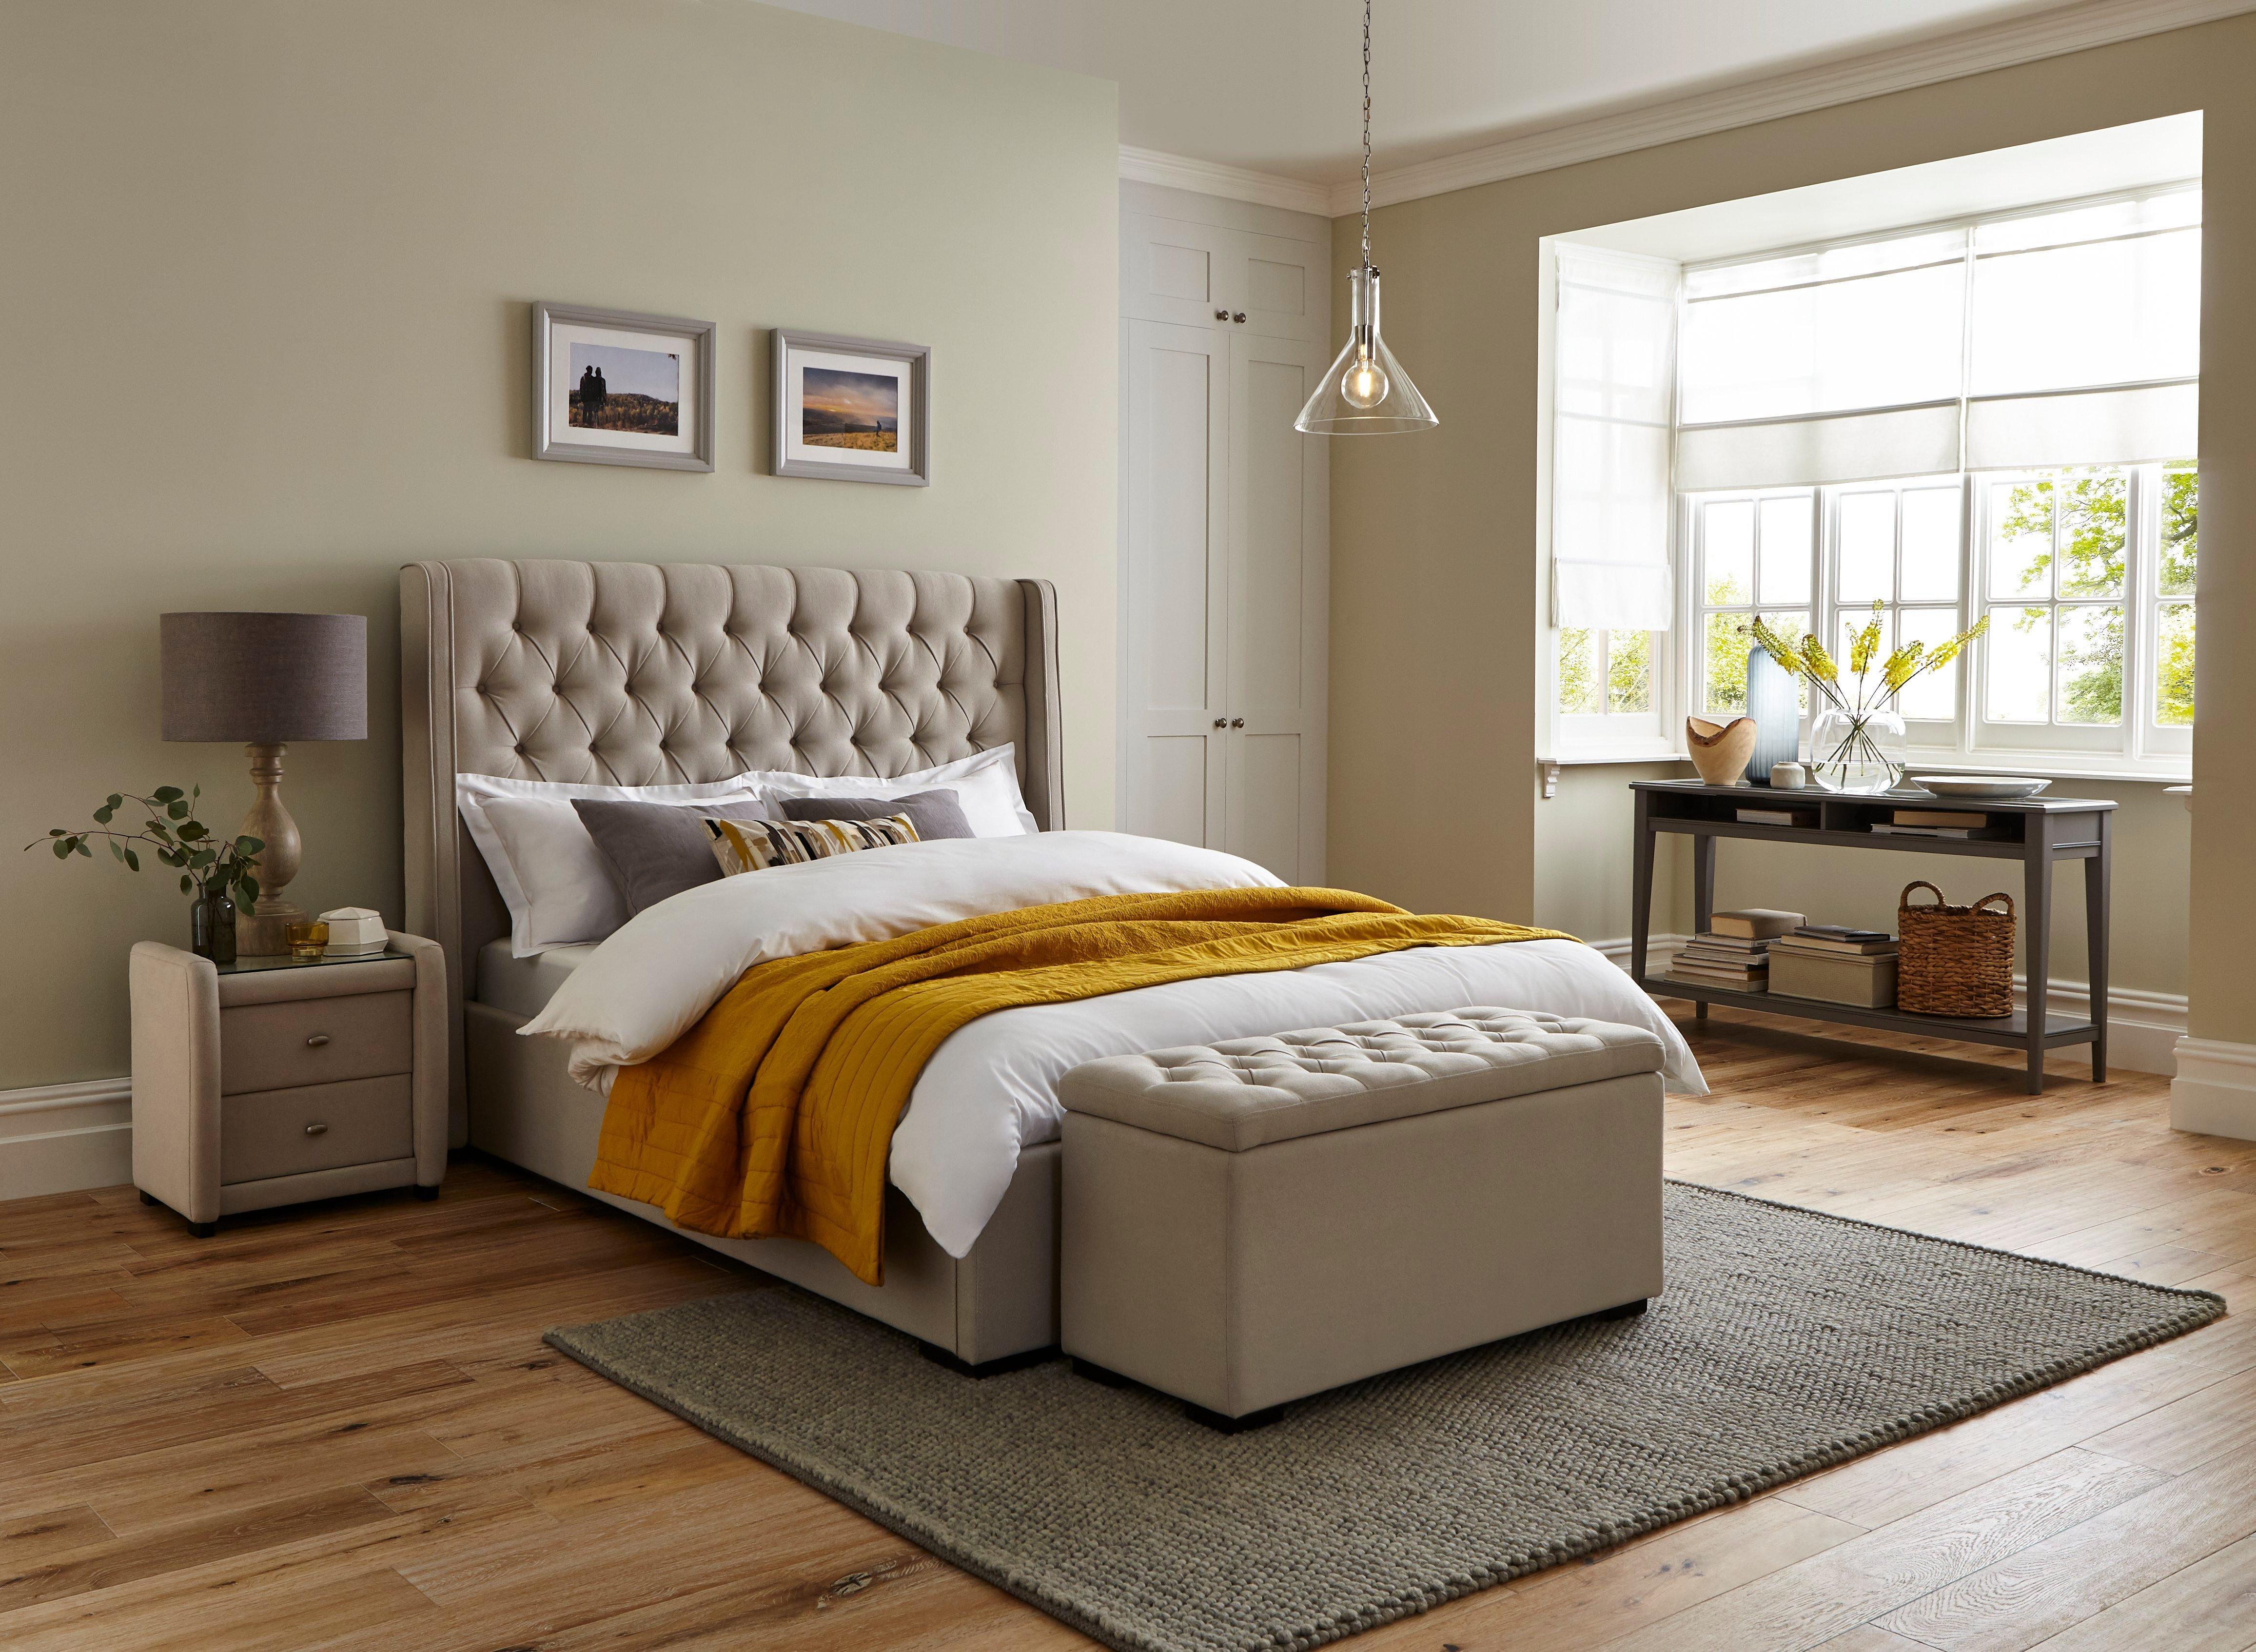 Are single bed frames for you?